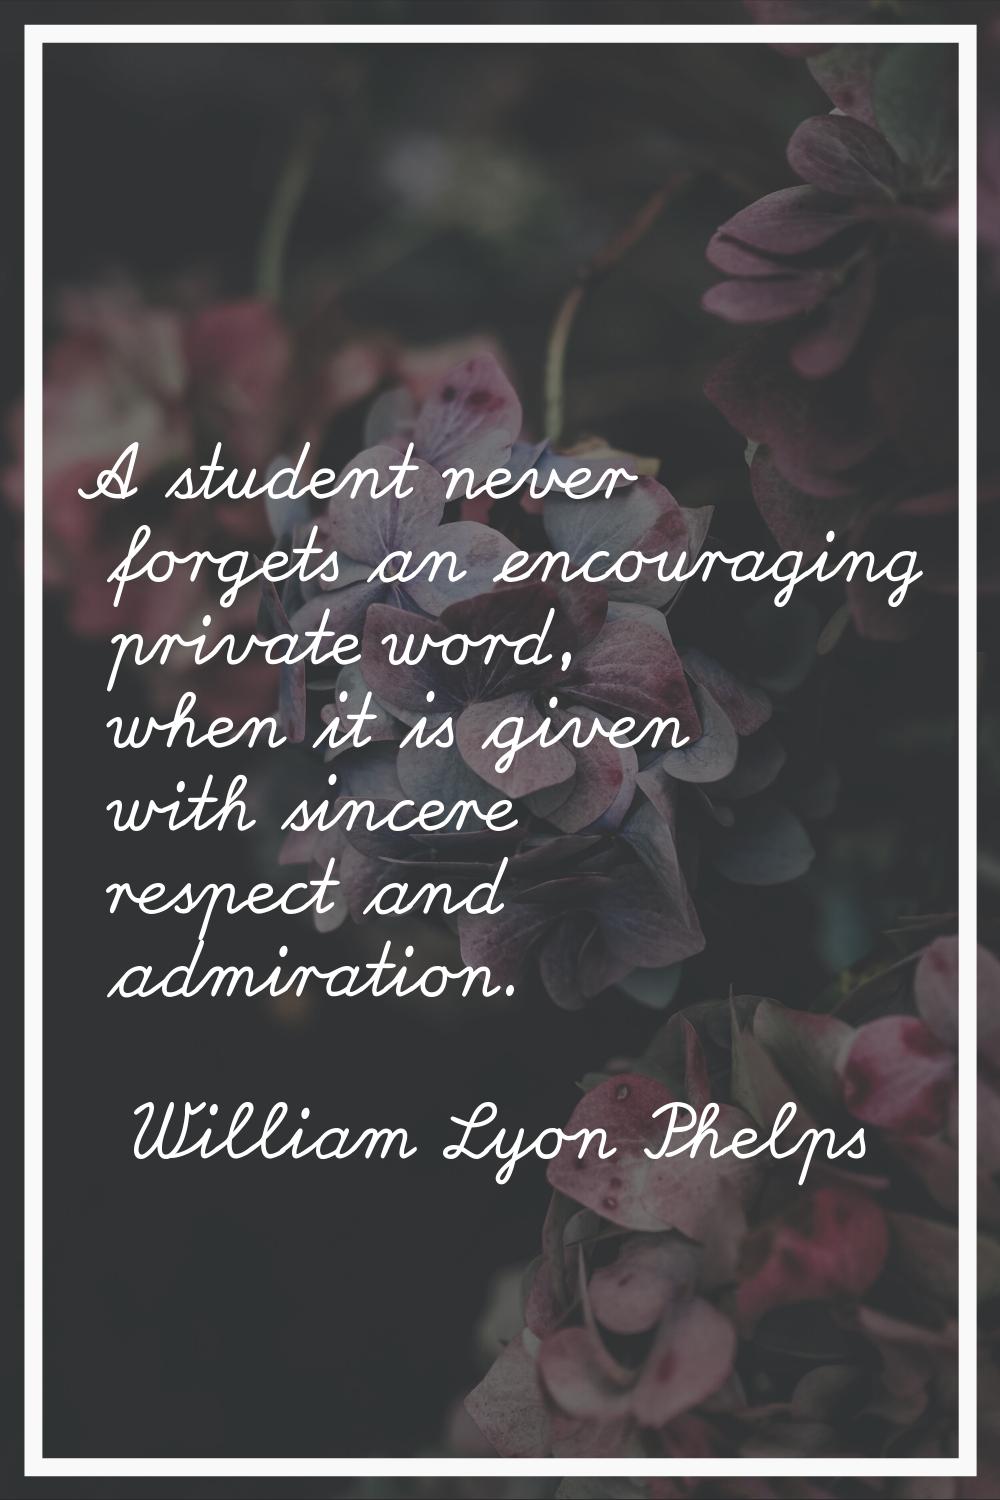 A student never forgets an encouraging private word, when it is given with sincere respect and admi